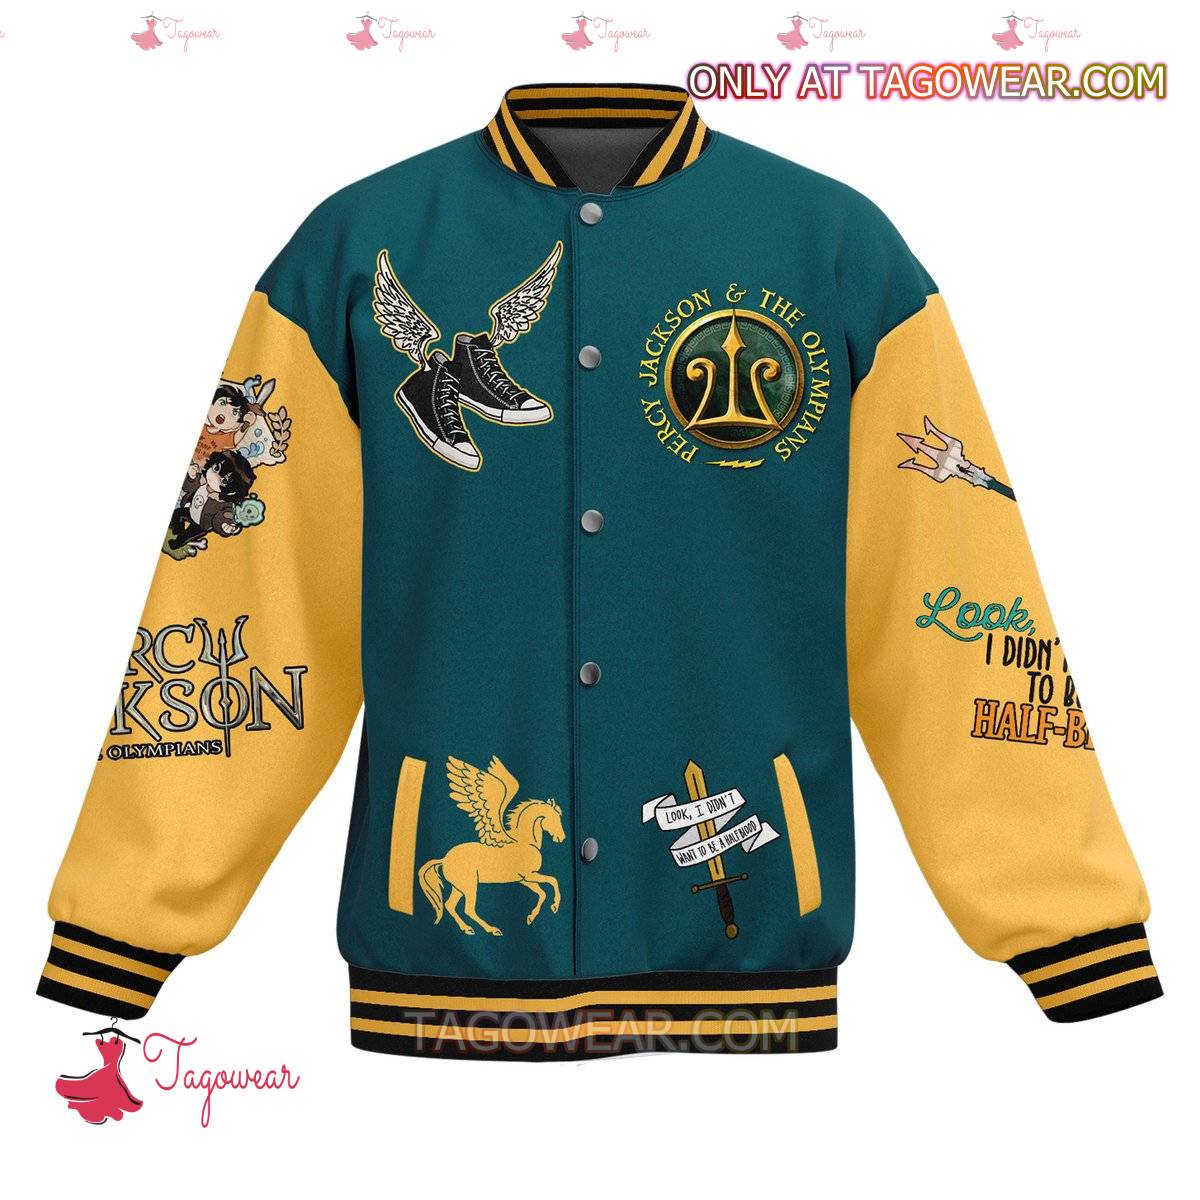 Percy Jackson Look I Didn't Want To Be A Half-blood Baseball Jacket a